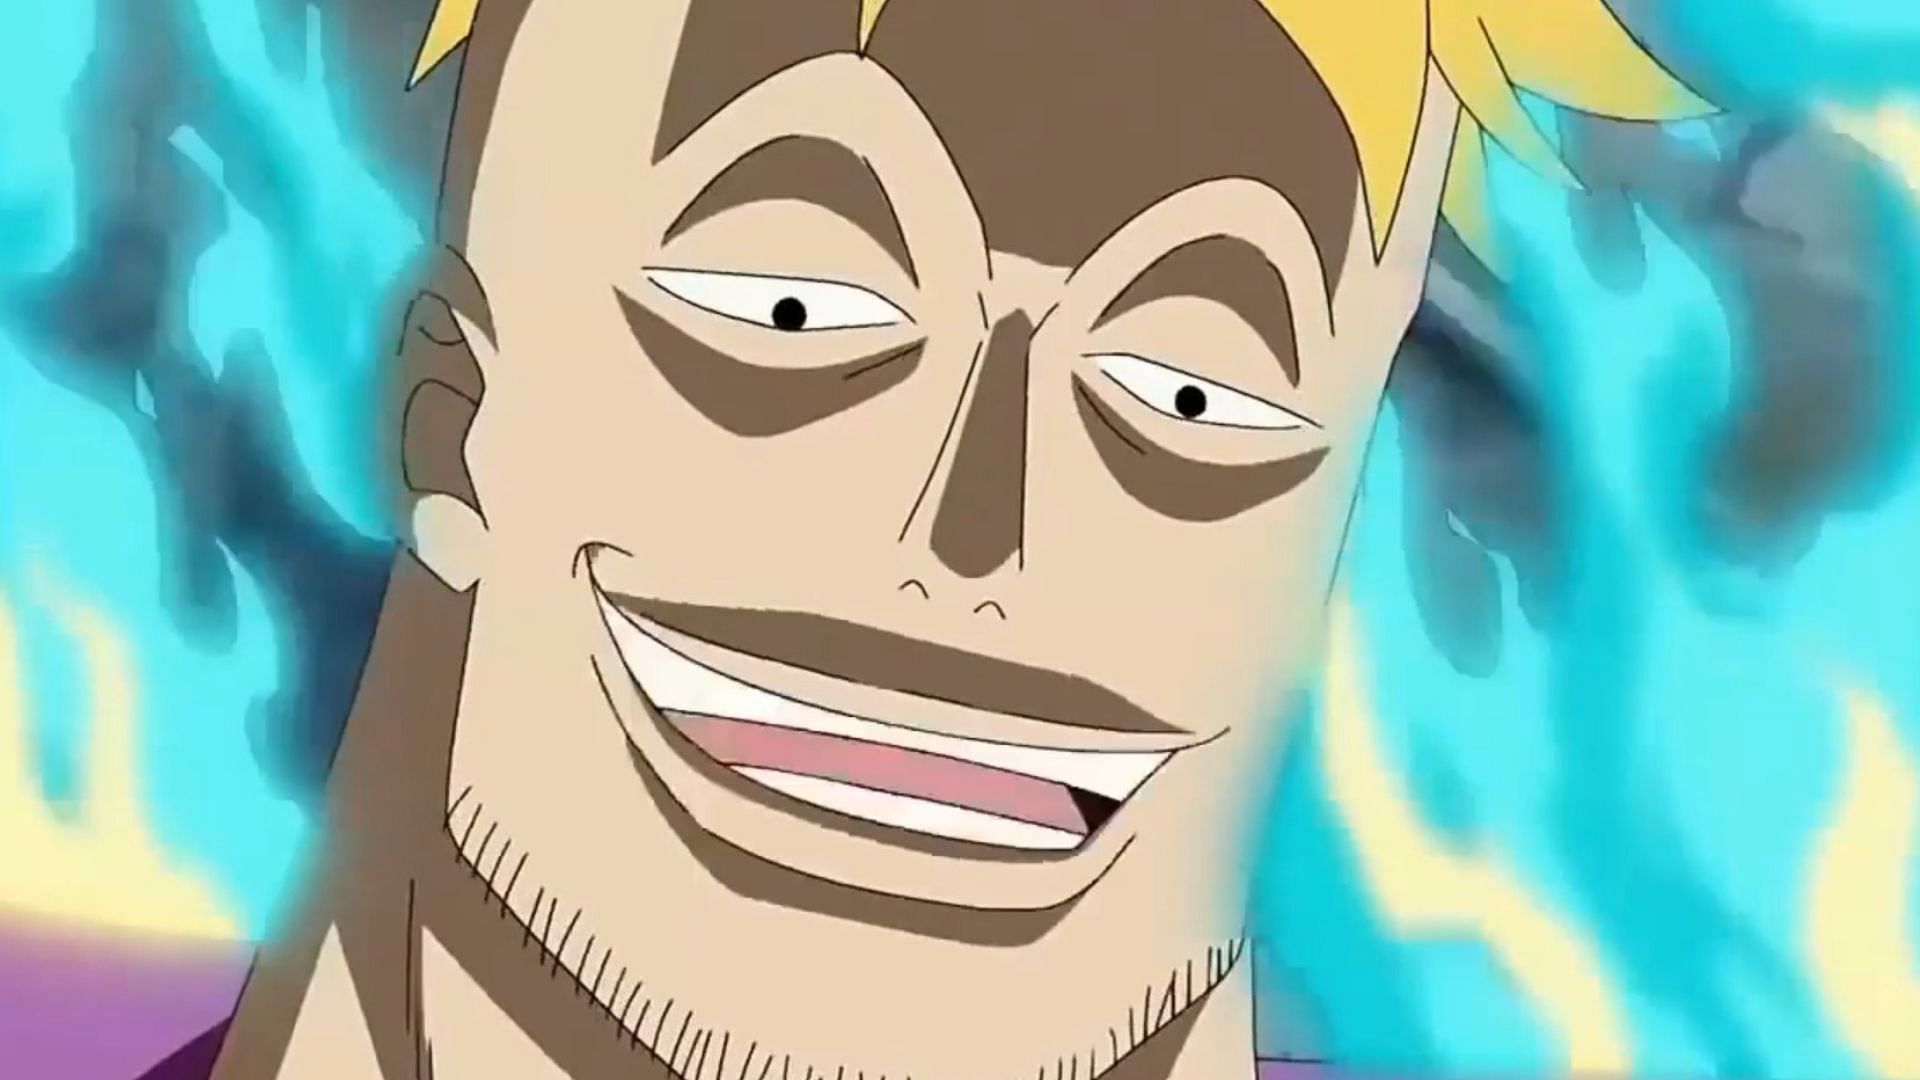 Marco from the One Piece anime (Image via Toei Animation)